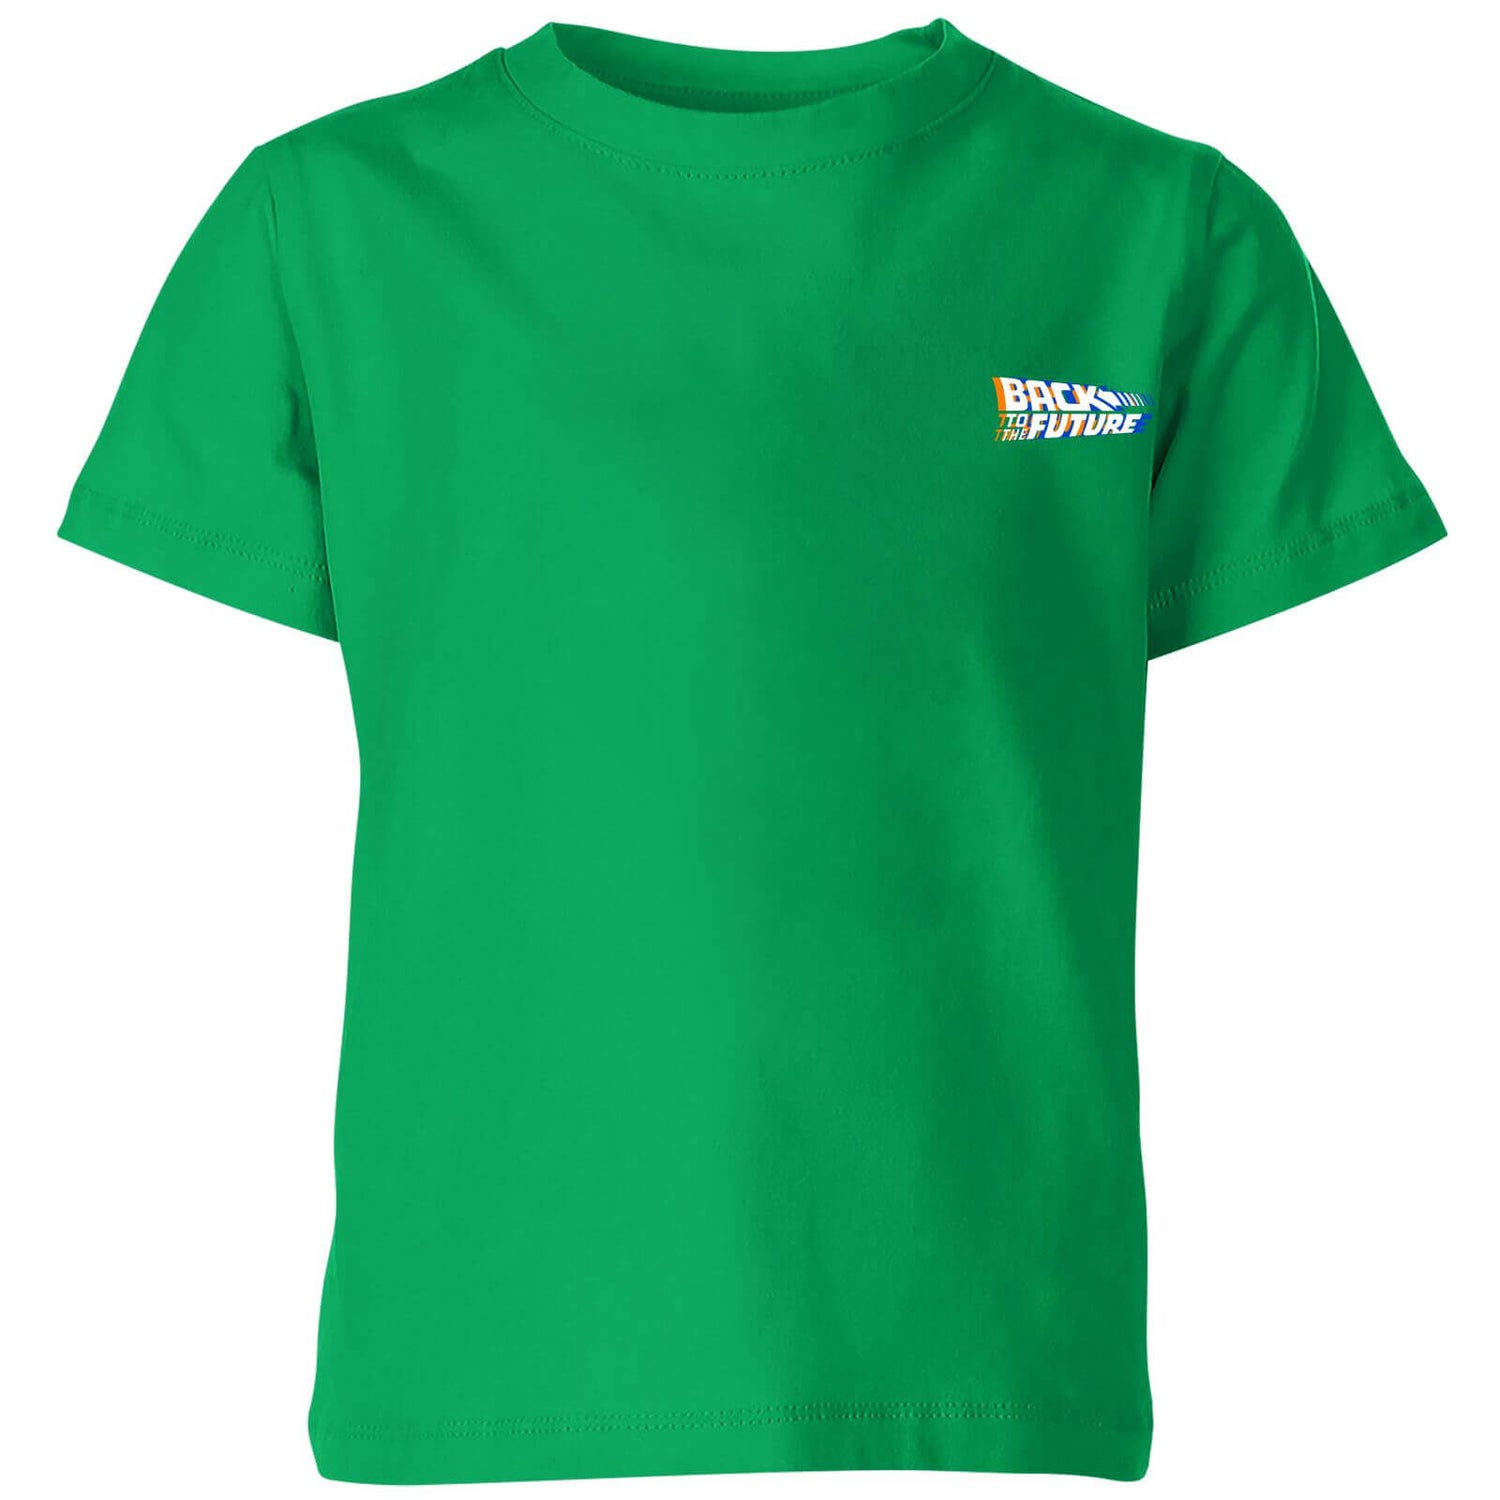 Back To The Future Kids' T-Shirt - Green